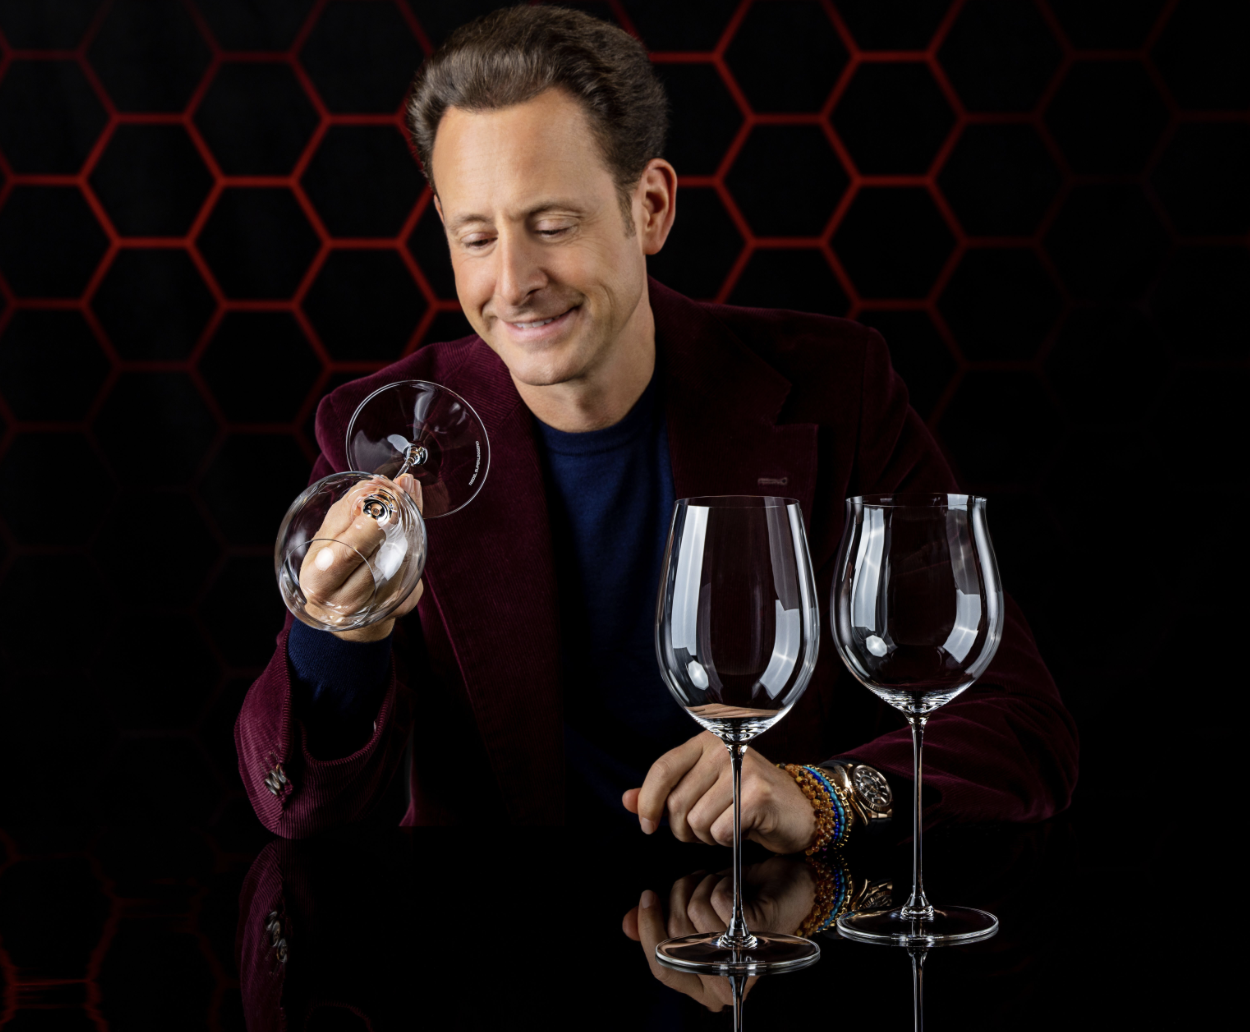 Riedel Wine Glasses Enhance Your Senses and Tasting Experience